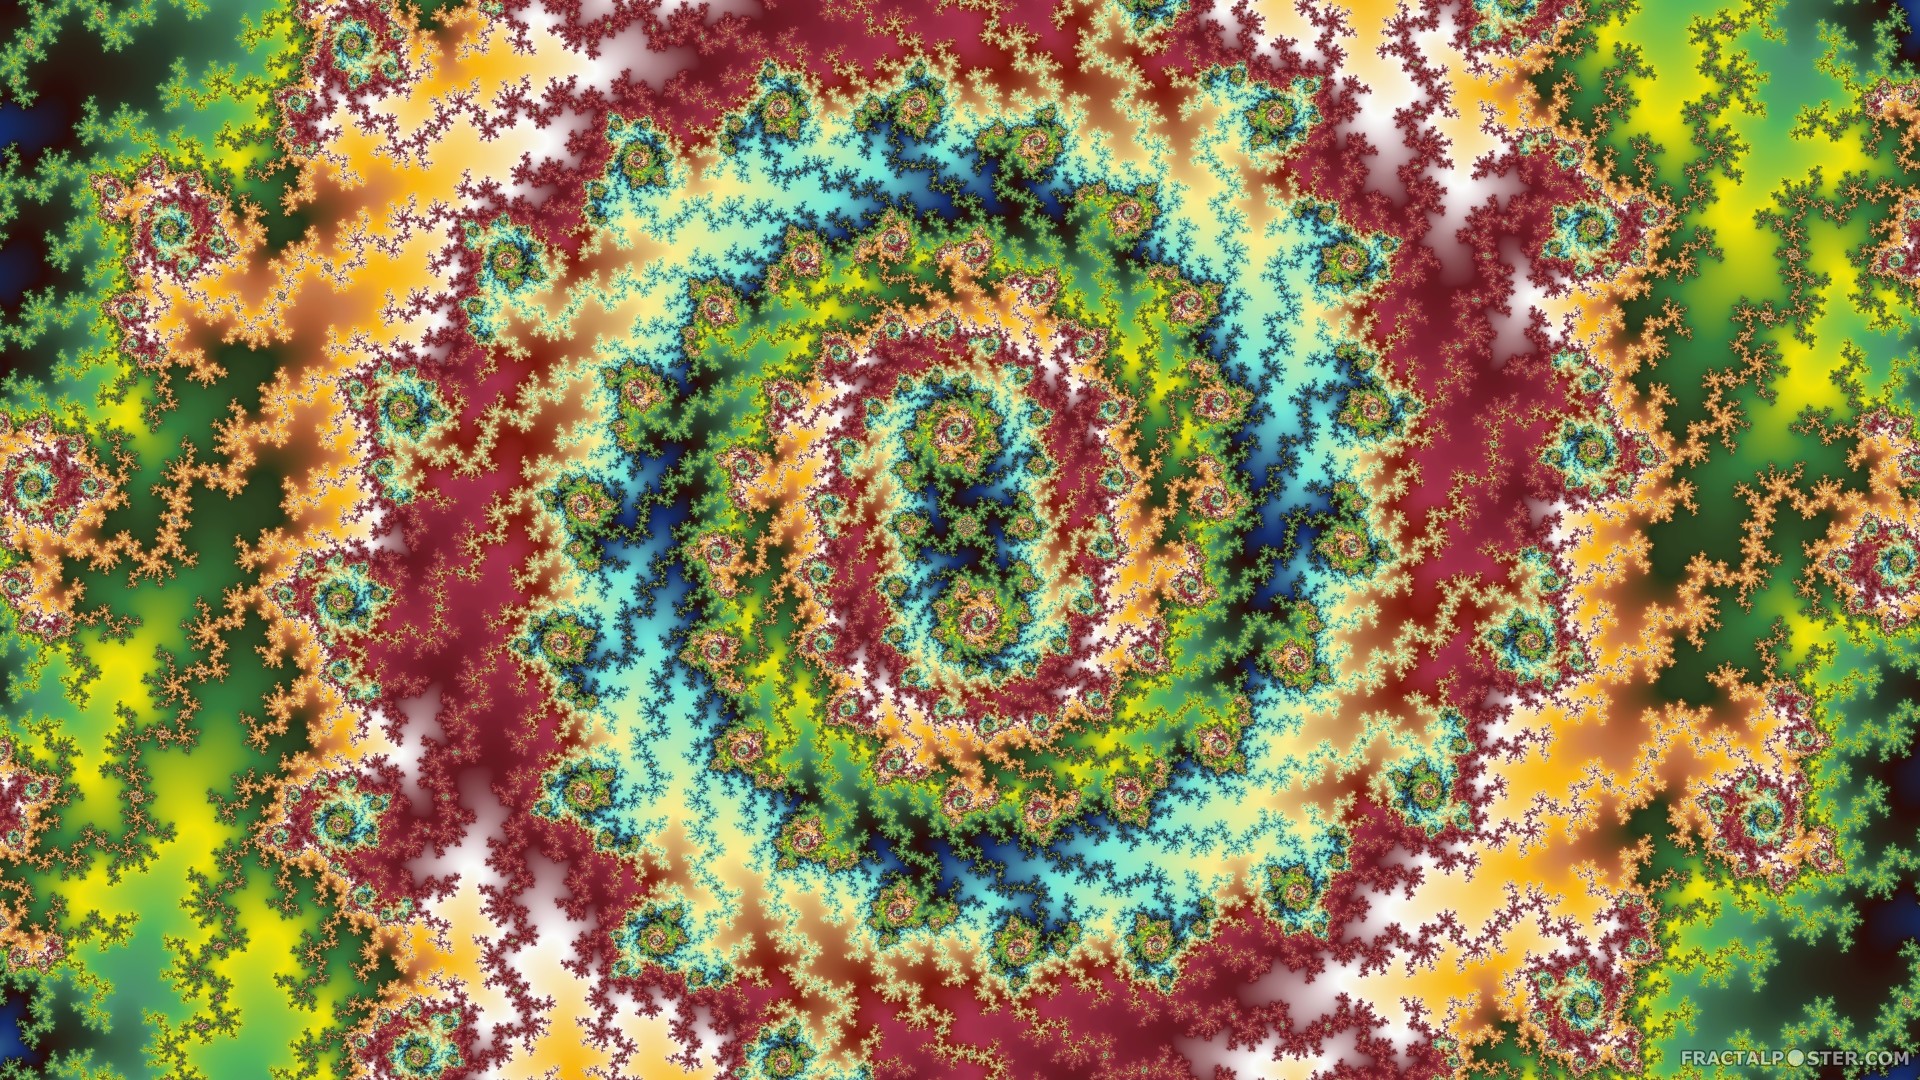 1920x1080 Candy Land fractal image by fractalposter HD Wallpapers posters 